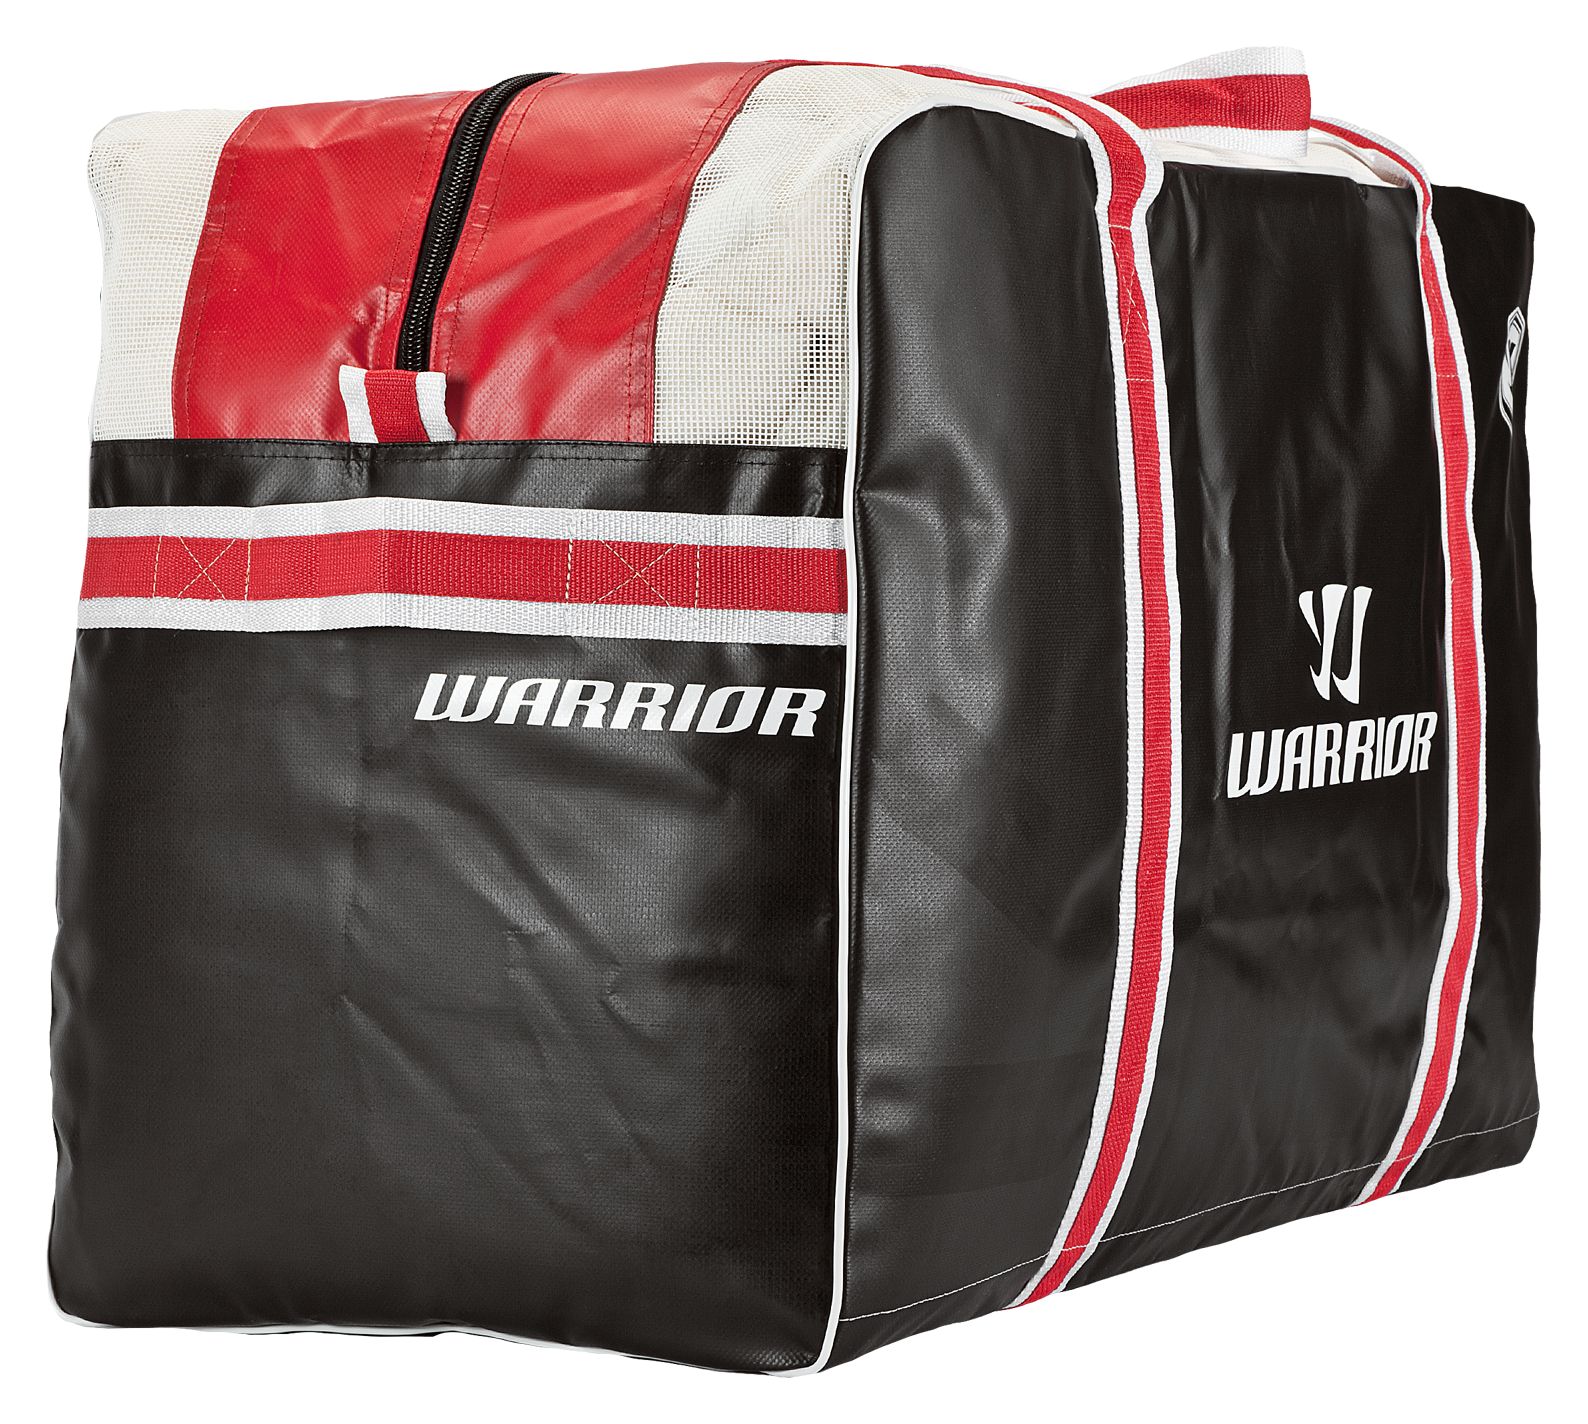 Warrior Pro Bag, Black with Red & White image number 0